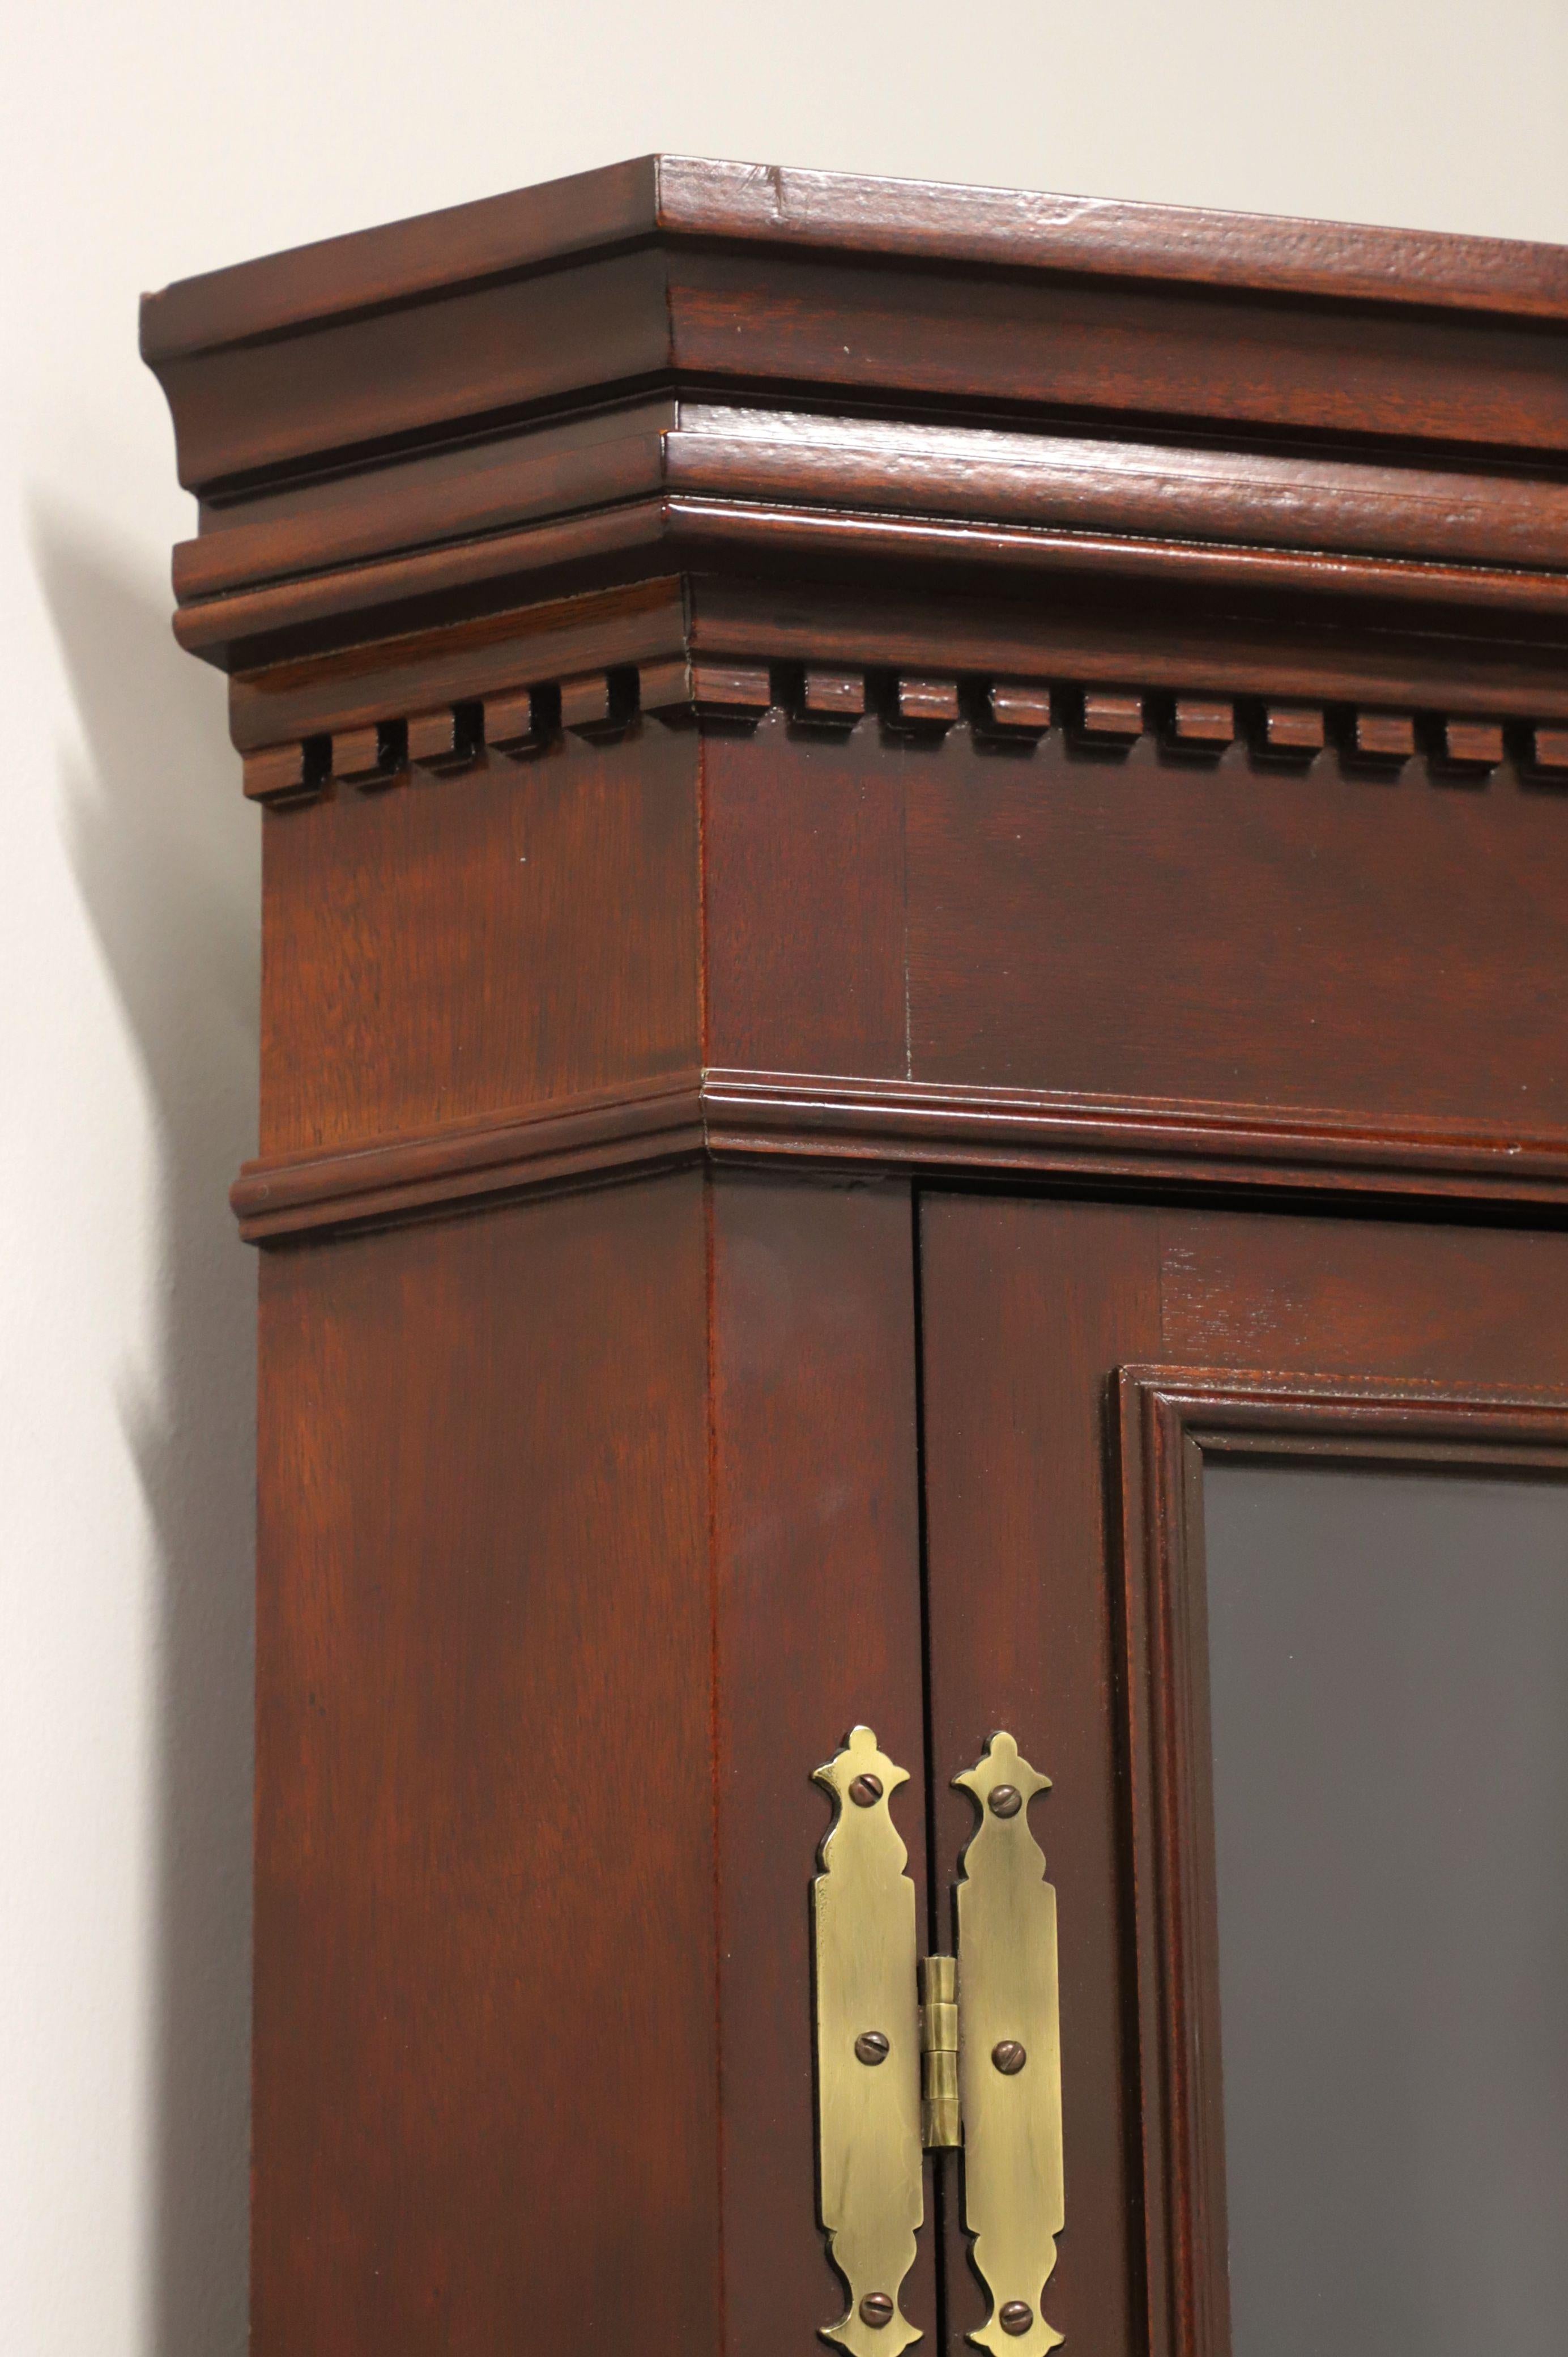 American CRAFTIQUE Solid Mahogany Chippendale Style Corner Cupboard / Cabinet - A For Sale